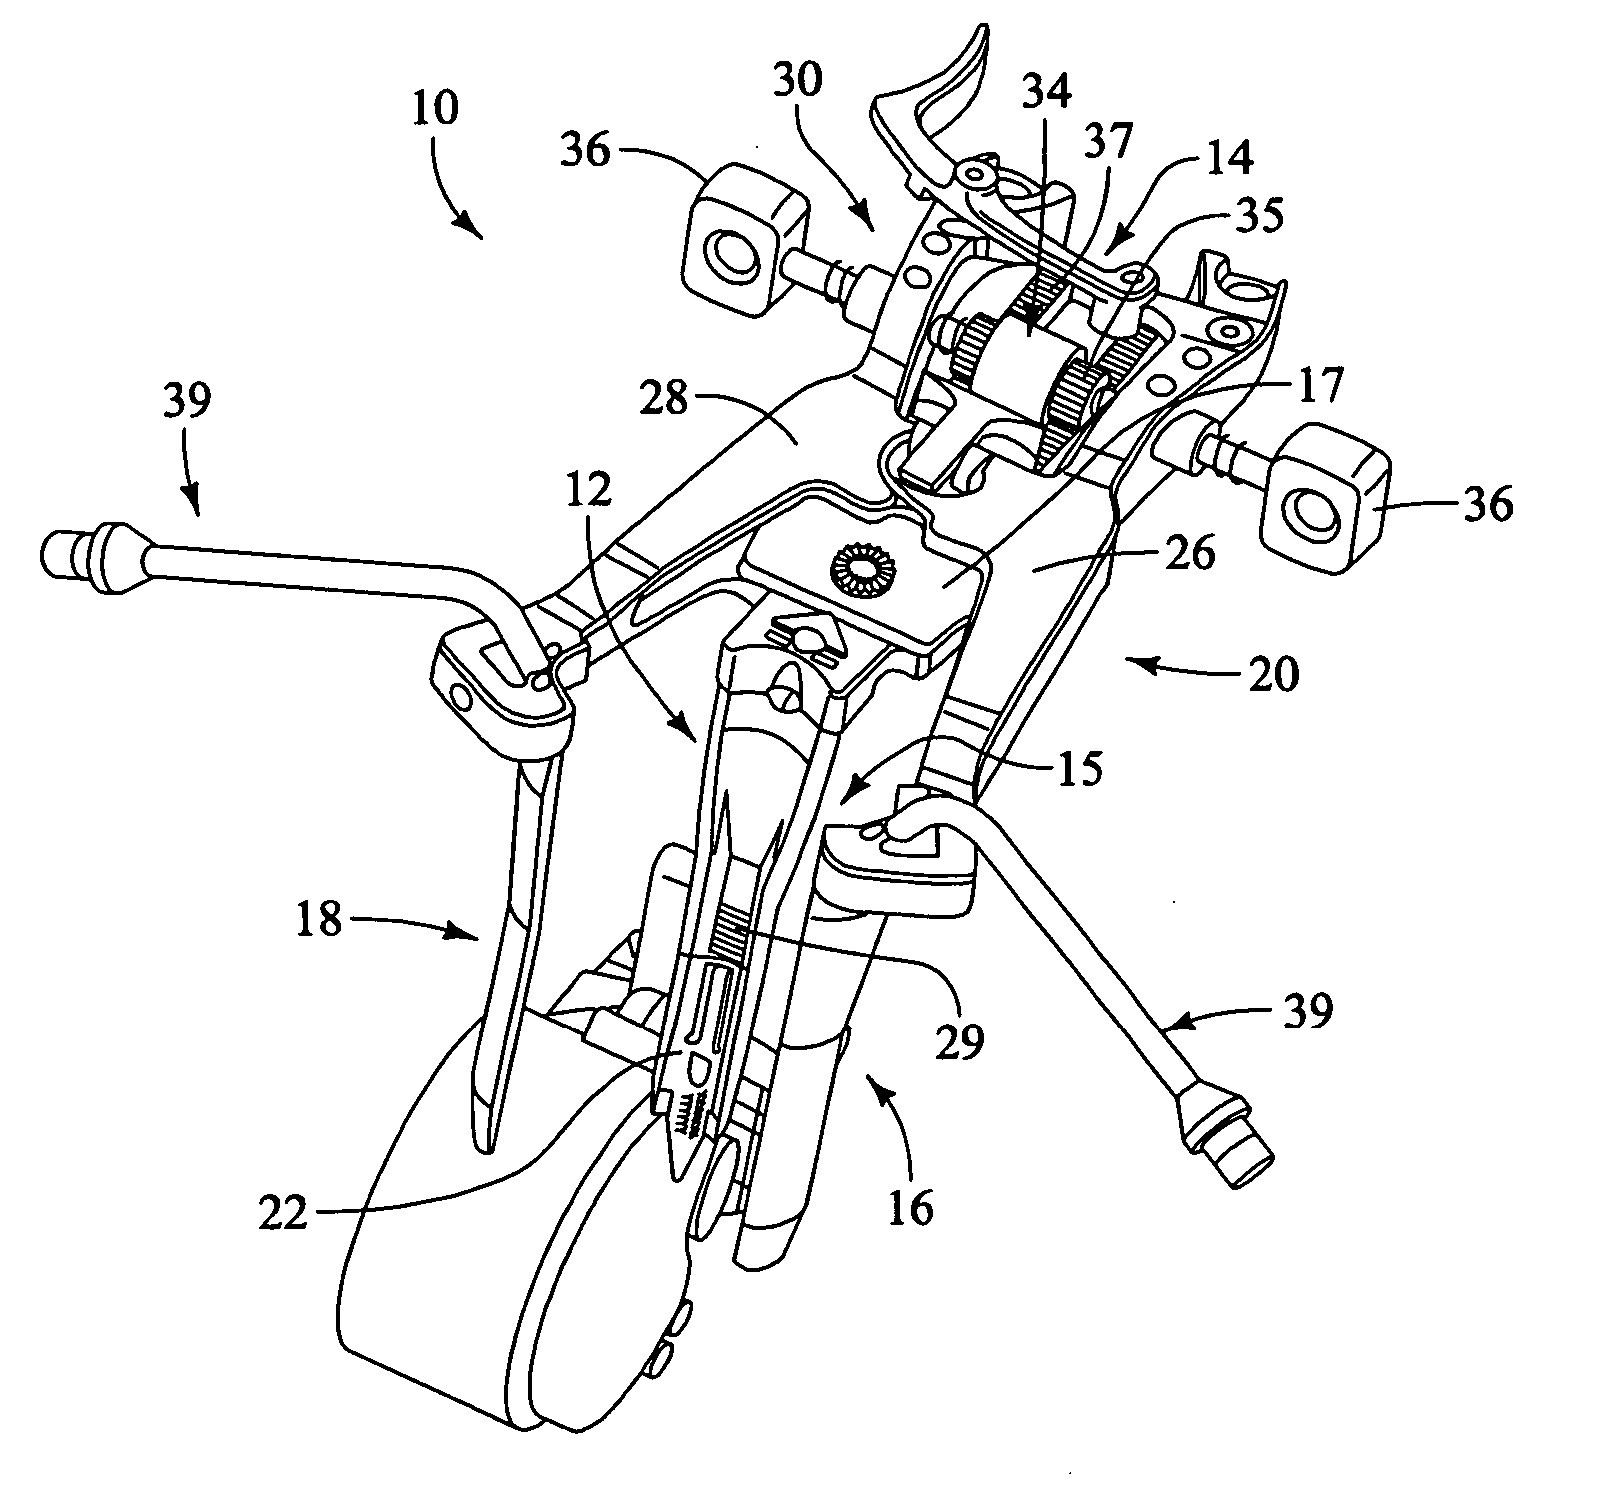 Surgical access system and related methods